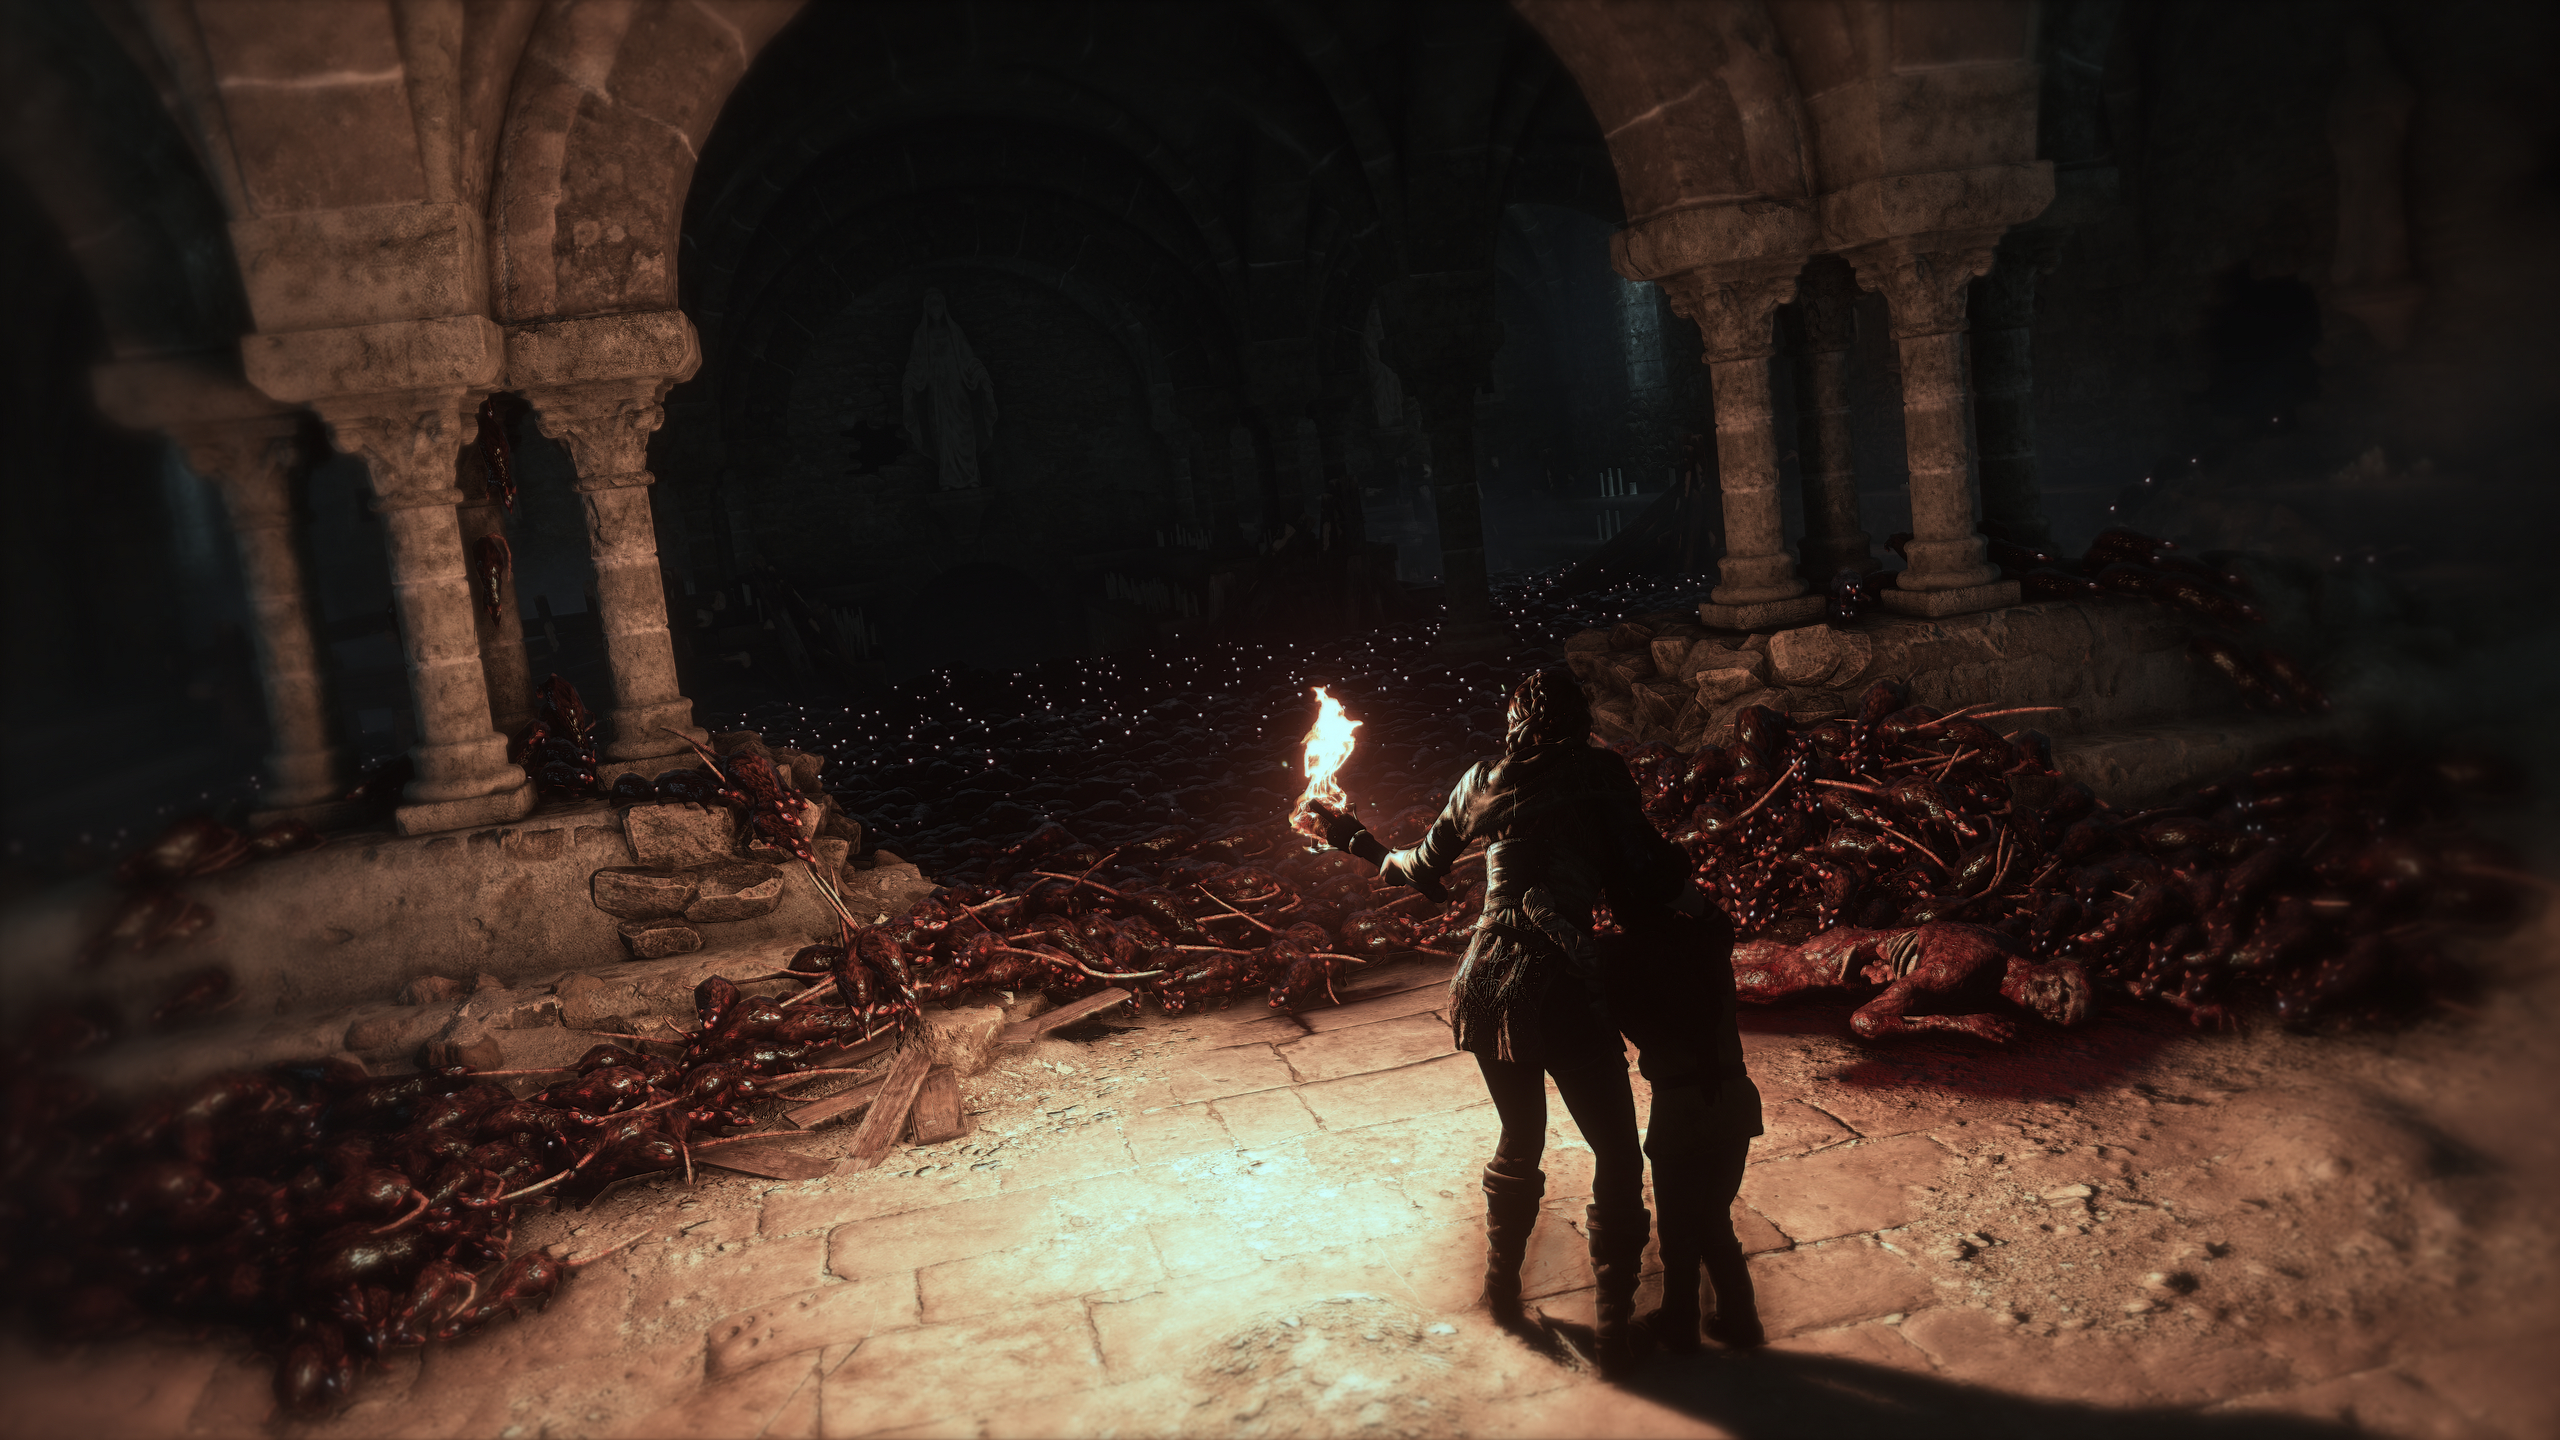 How many chapters are in A Plague Tale: Requiem?